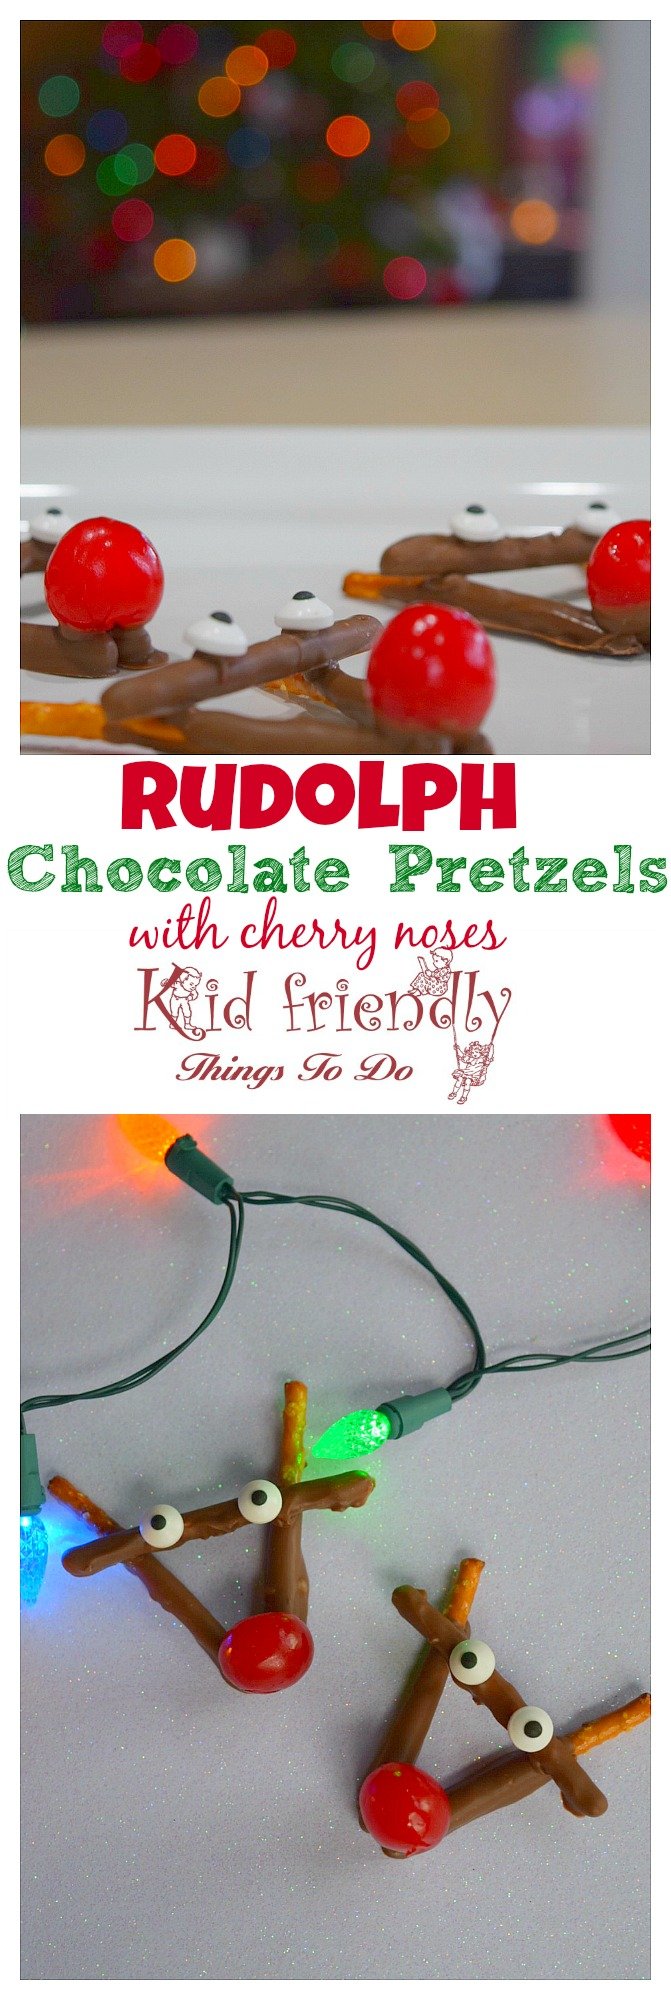 Rudolph Chocolate and Cherry Pretzel Treats for Christmas - easy to make. A fun treat for the kids and yummy for everyone! www.kidfriendlythings todo.com